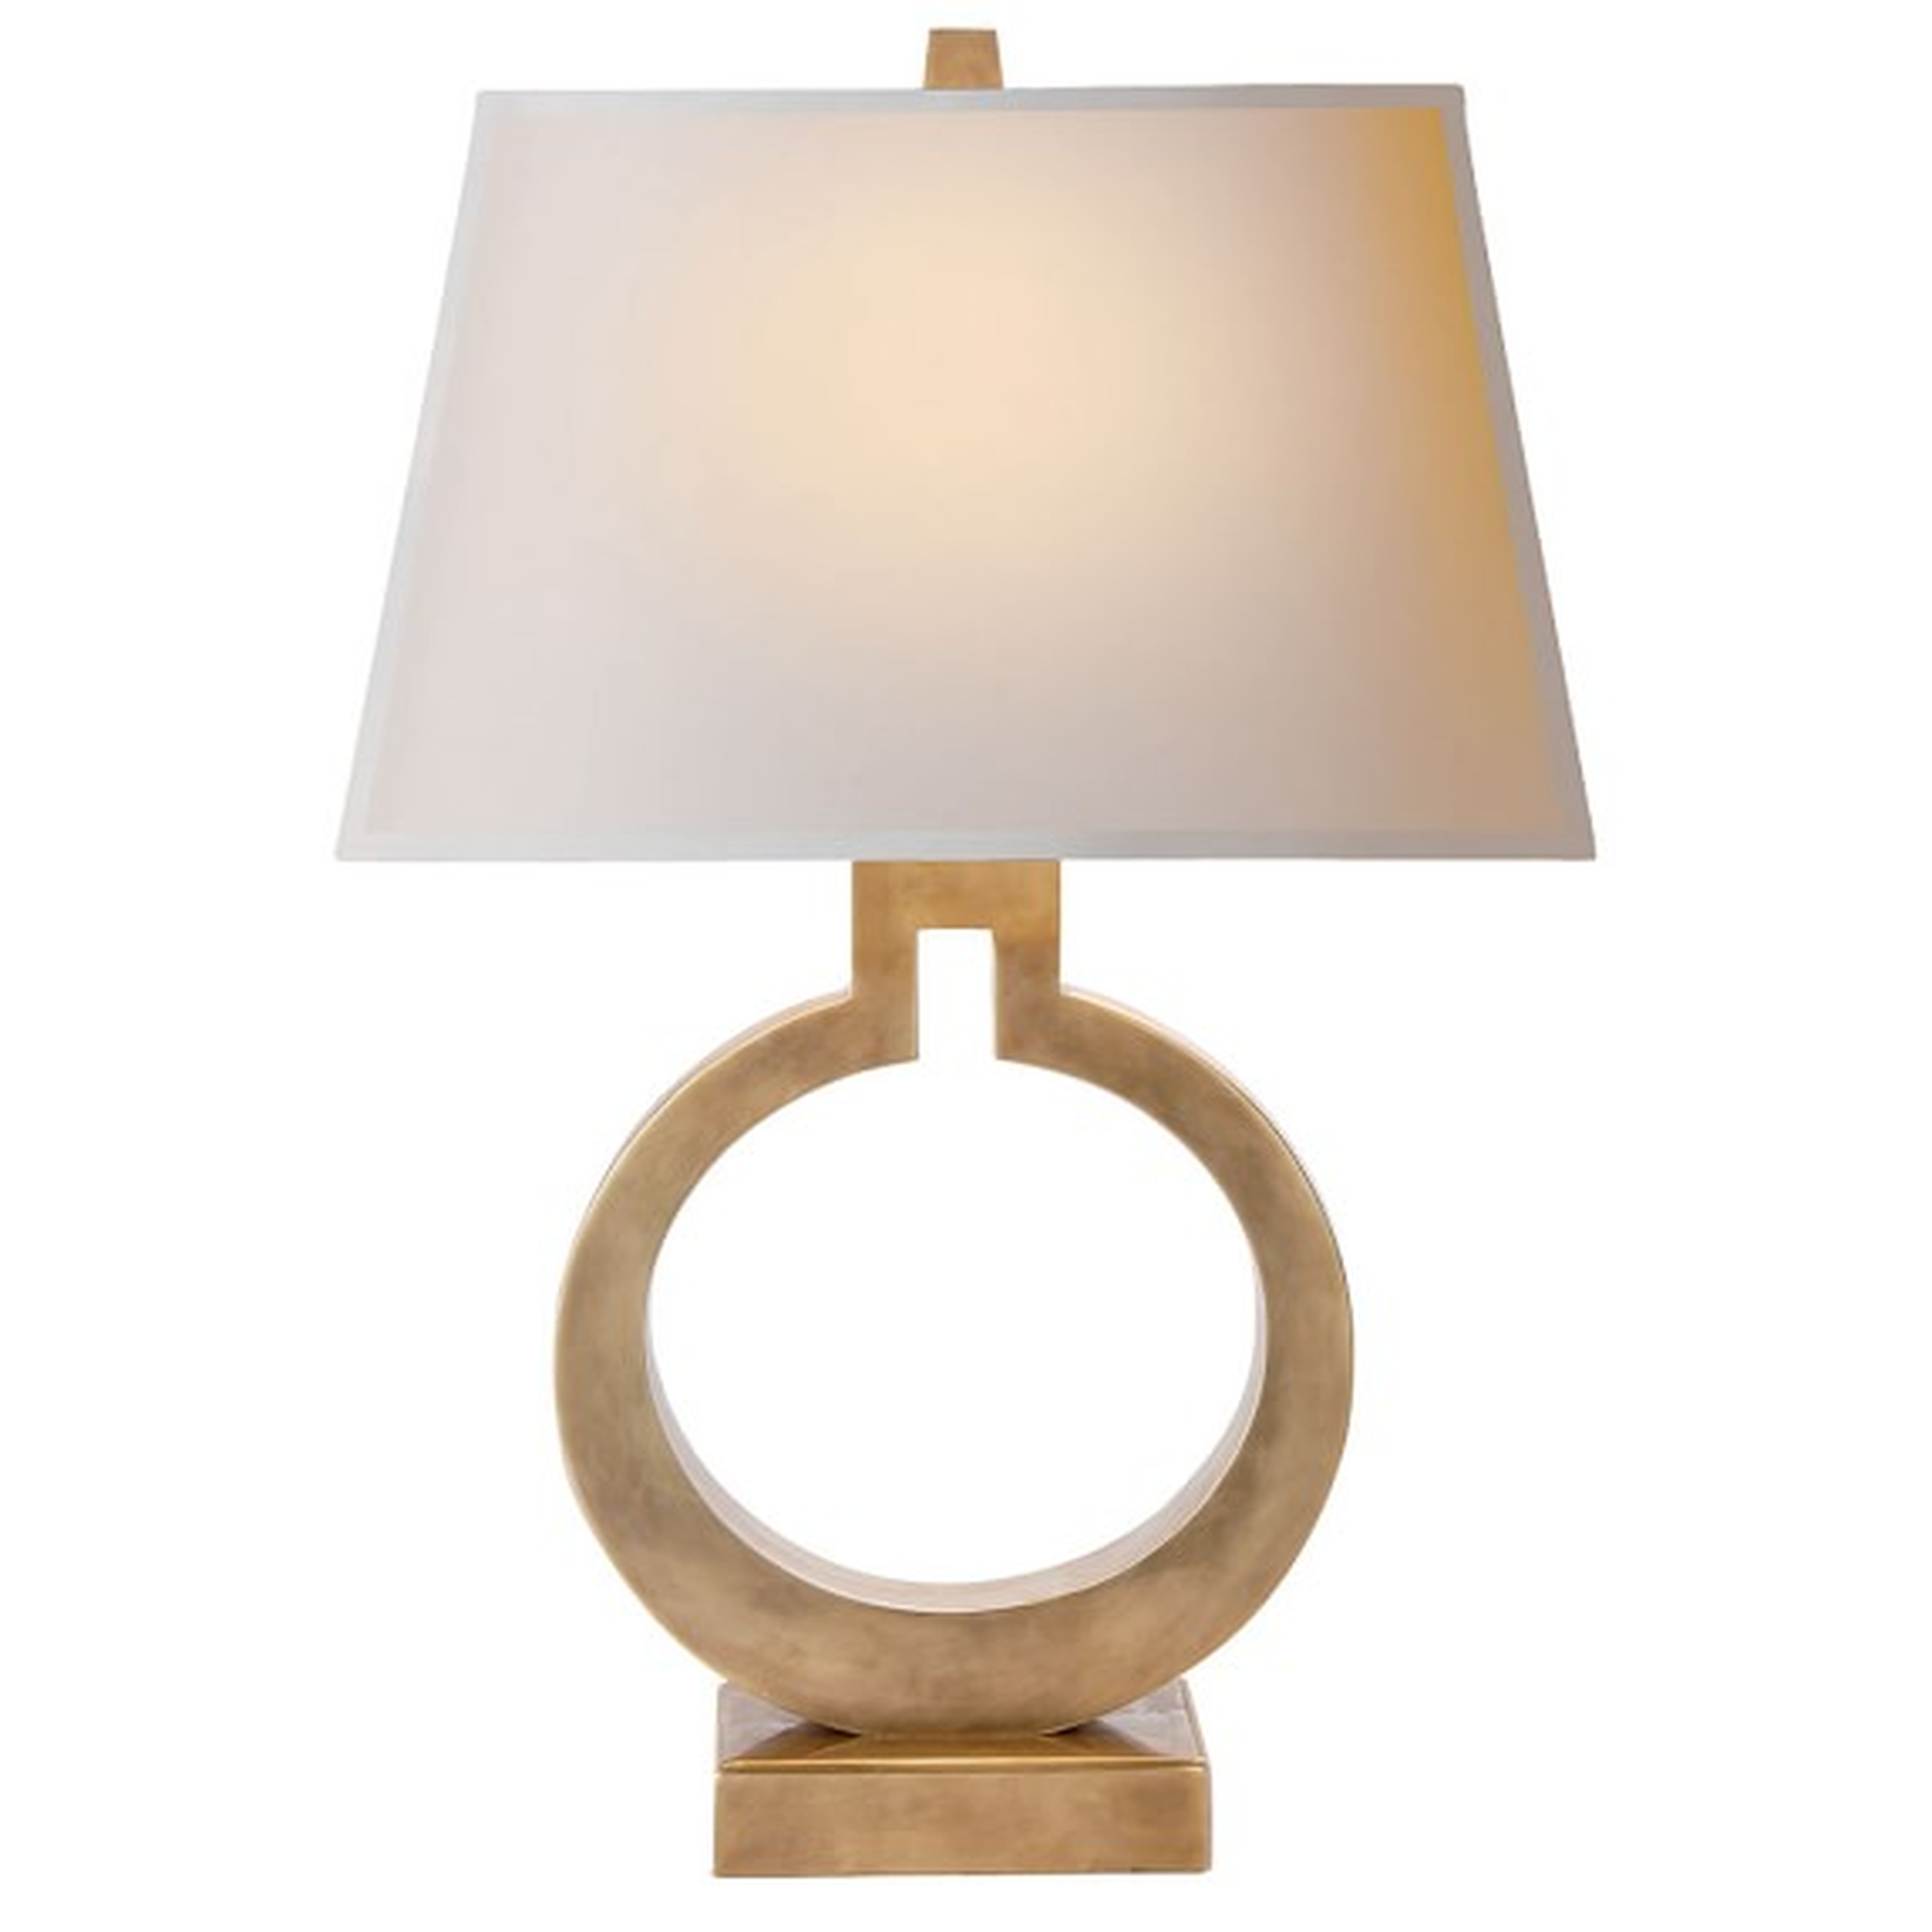 Madison Table Lamp, Antique Brass - Williams Sonoma Home